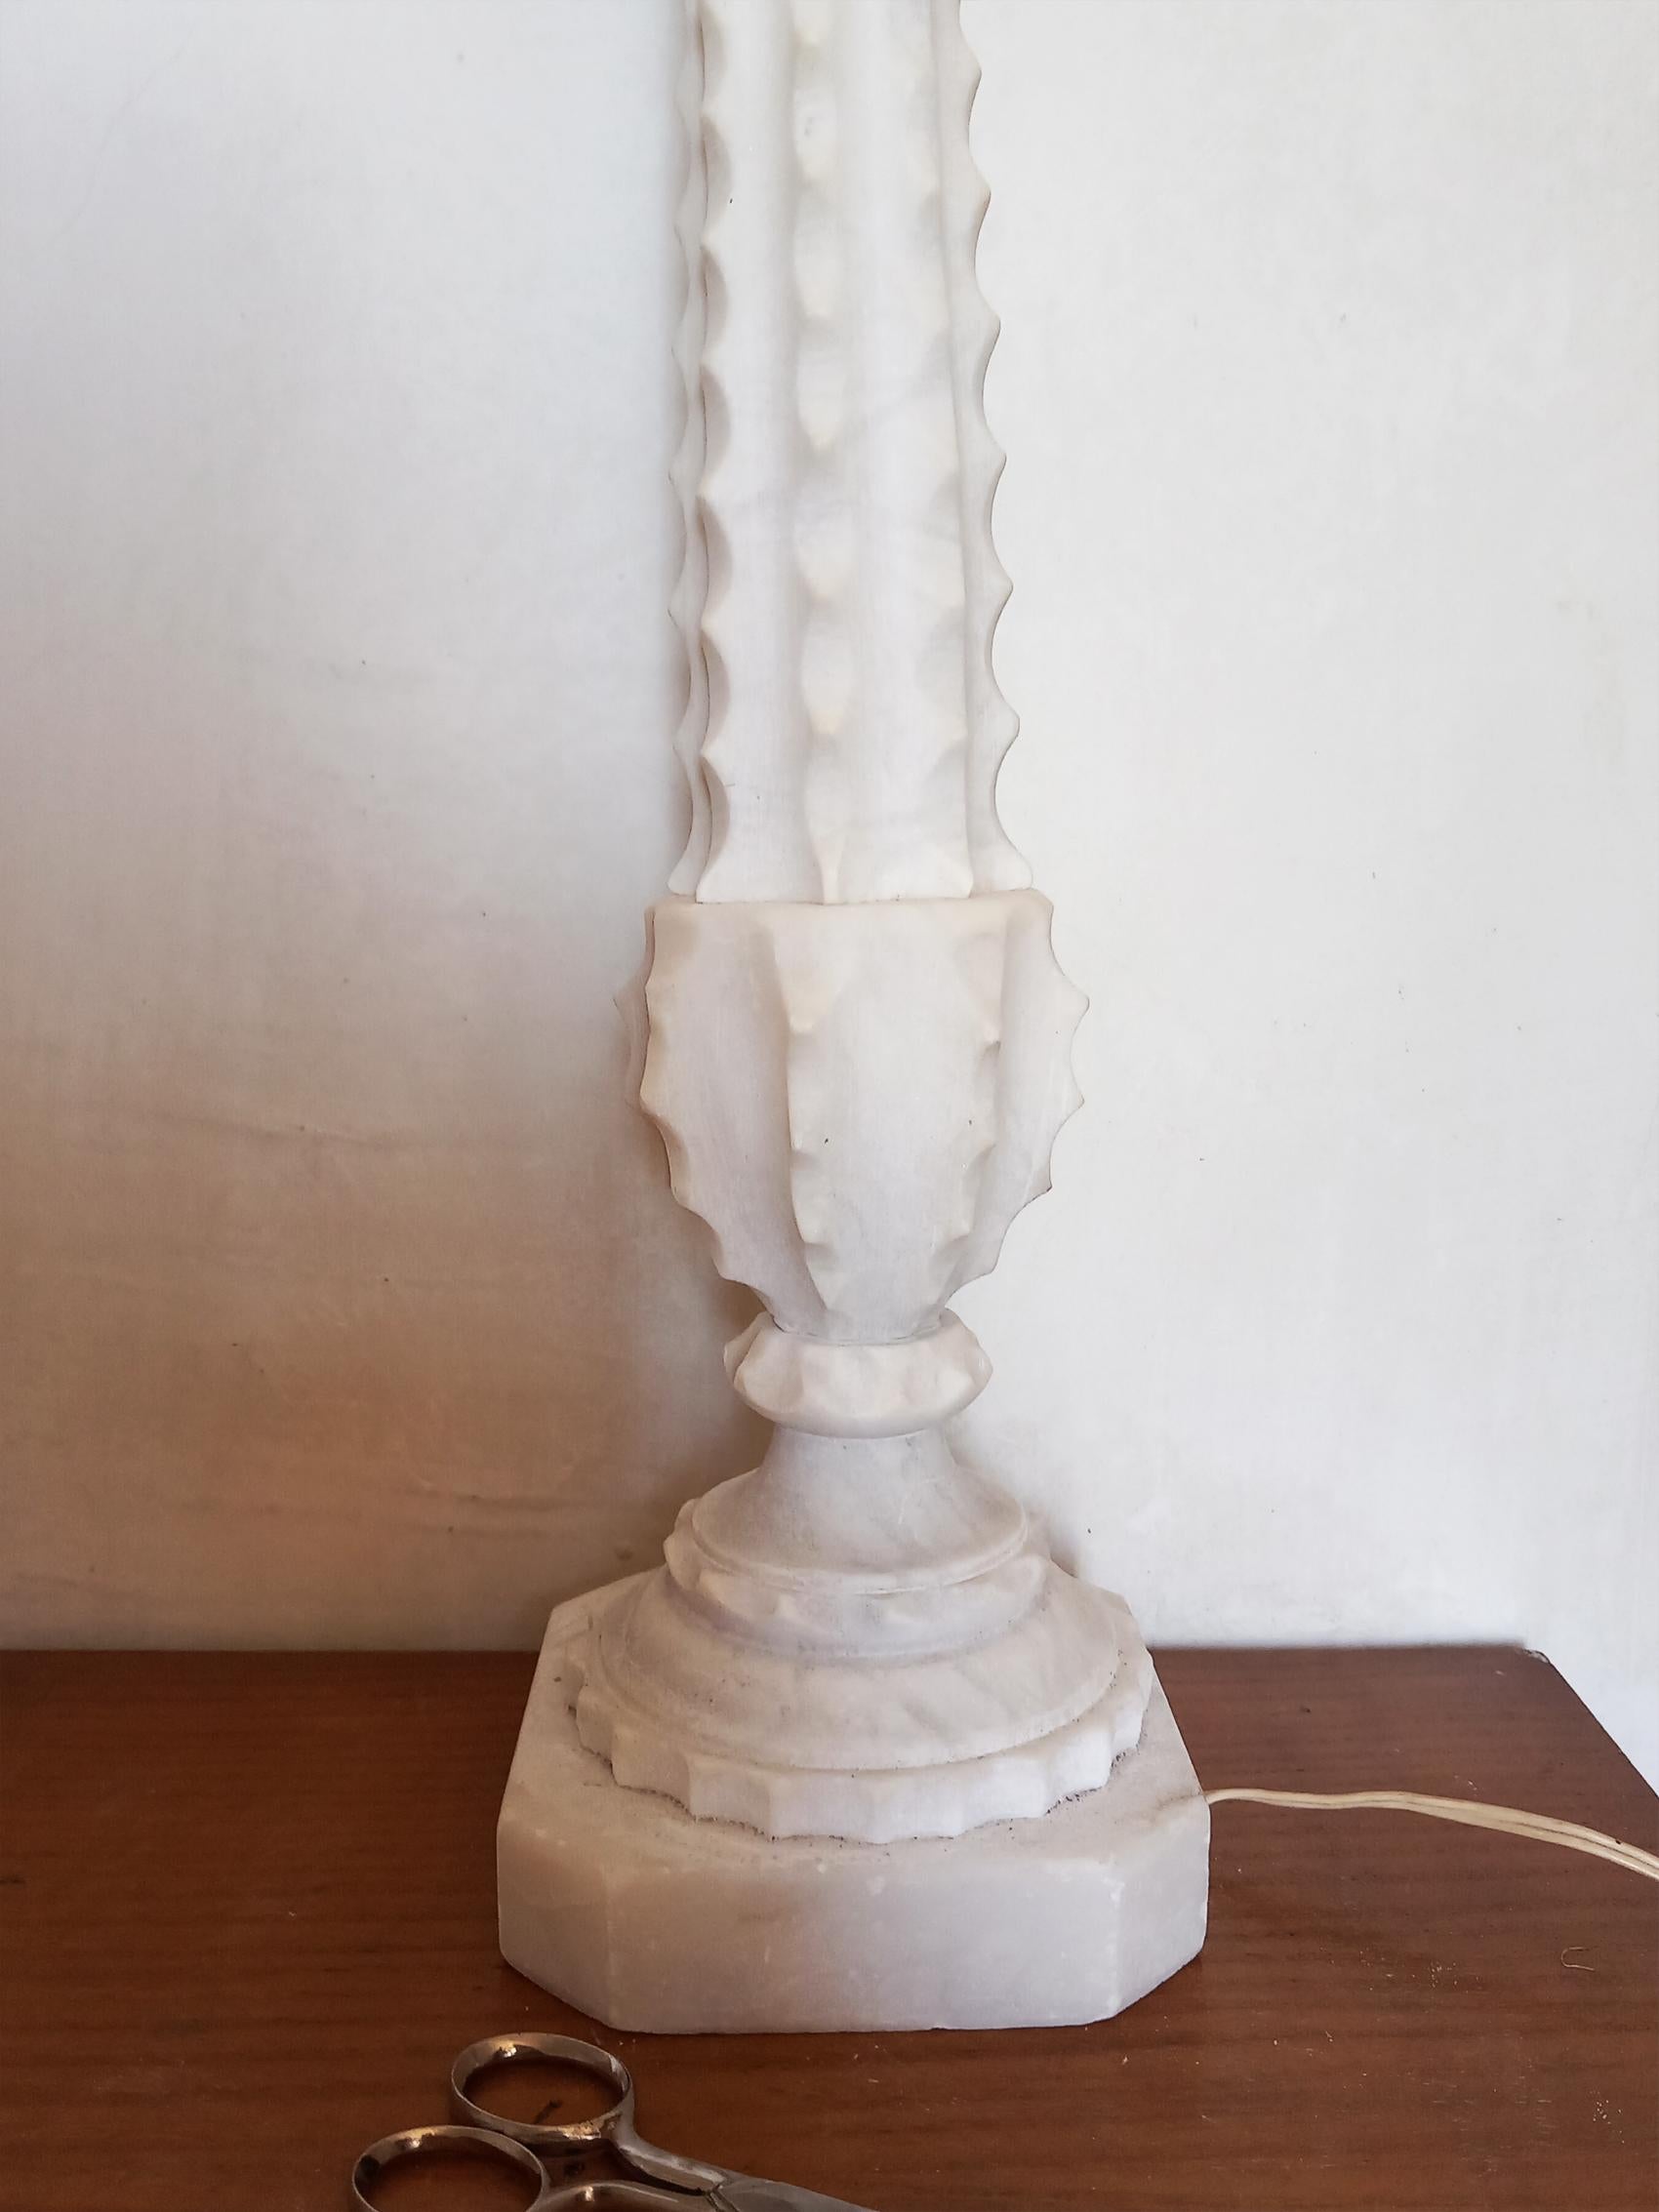  Art Deco White alabaster lamp or statuary marble, organic shape, sculpture, sculptural lamp. Unique piece,  

Classic style. White alabaster table lamp
These lamps are getting harder and harder to find and it will be harder to find them in the